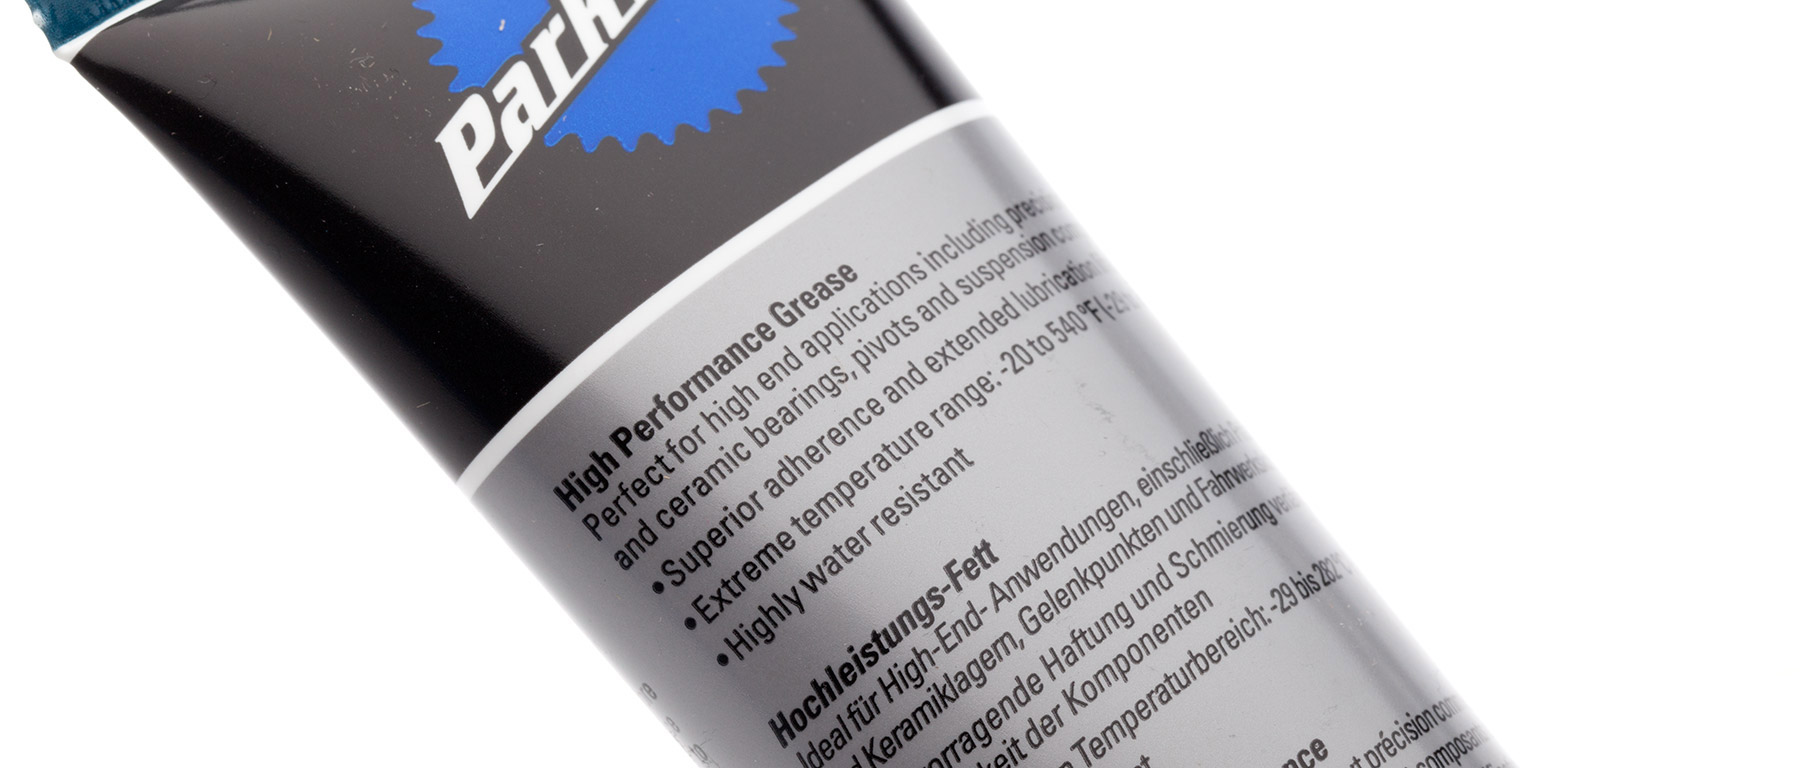 Park Tool HPG-1 High Performance Grease 4oz